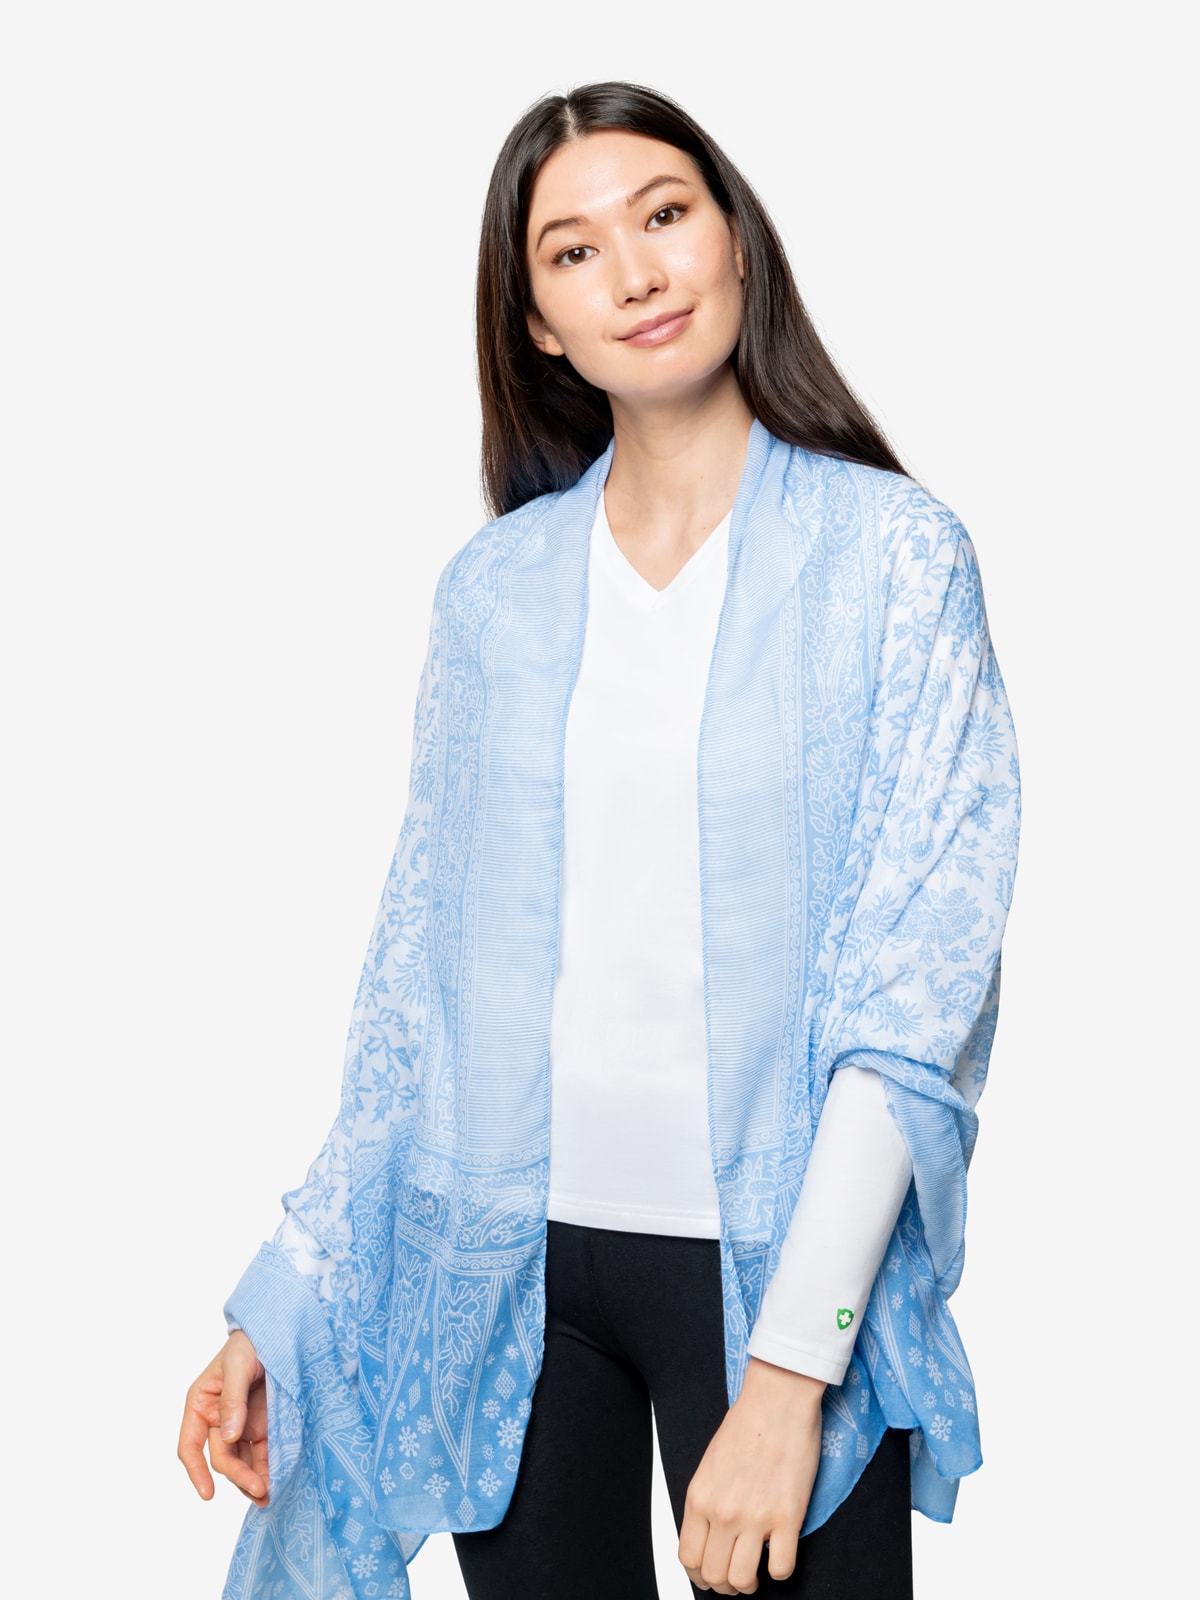 Insect Shield Versatile Wrap Scarf | Light Blue | 100% Polyester